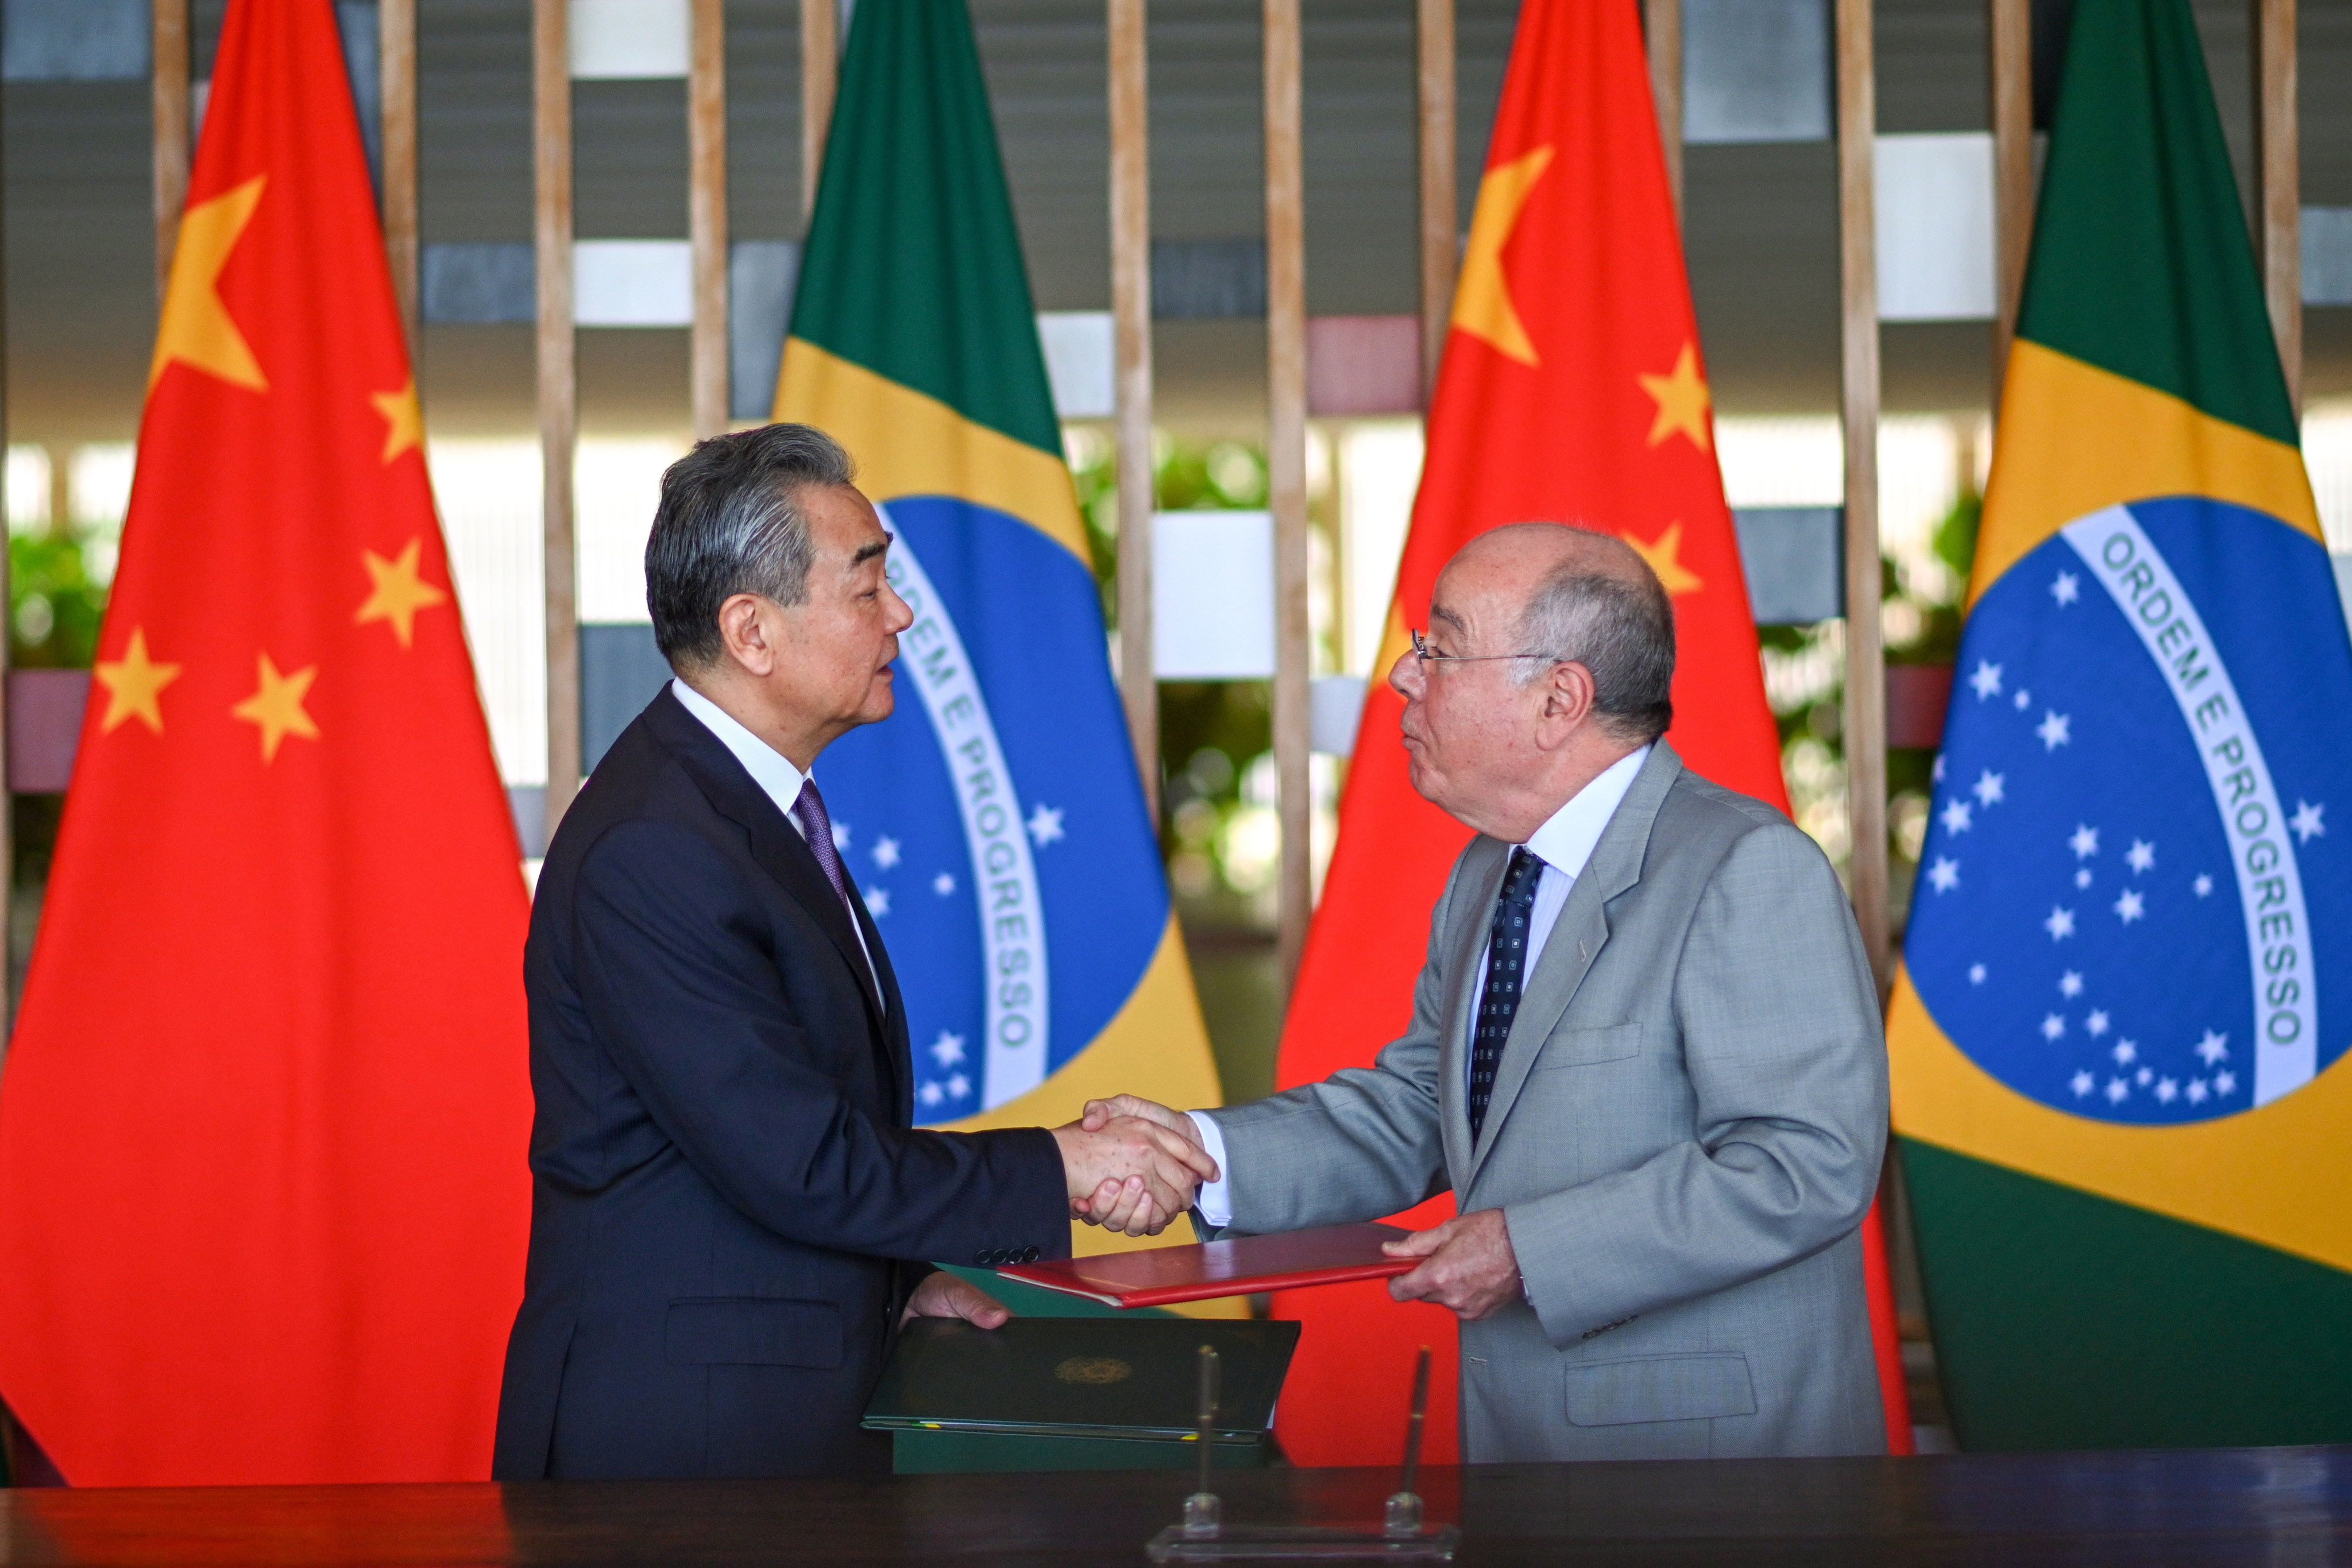 Brazilian Foreign Minister Mauro Vieira (right) greets his Chinese counterpart Wang Yi at the Itamaraty Palace in Brasilia, Brazil, on Friday. Photo: EPA-EFE